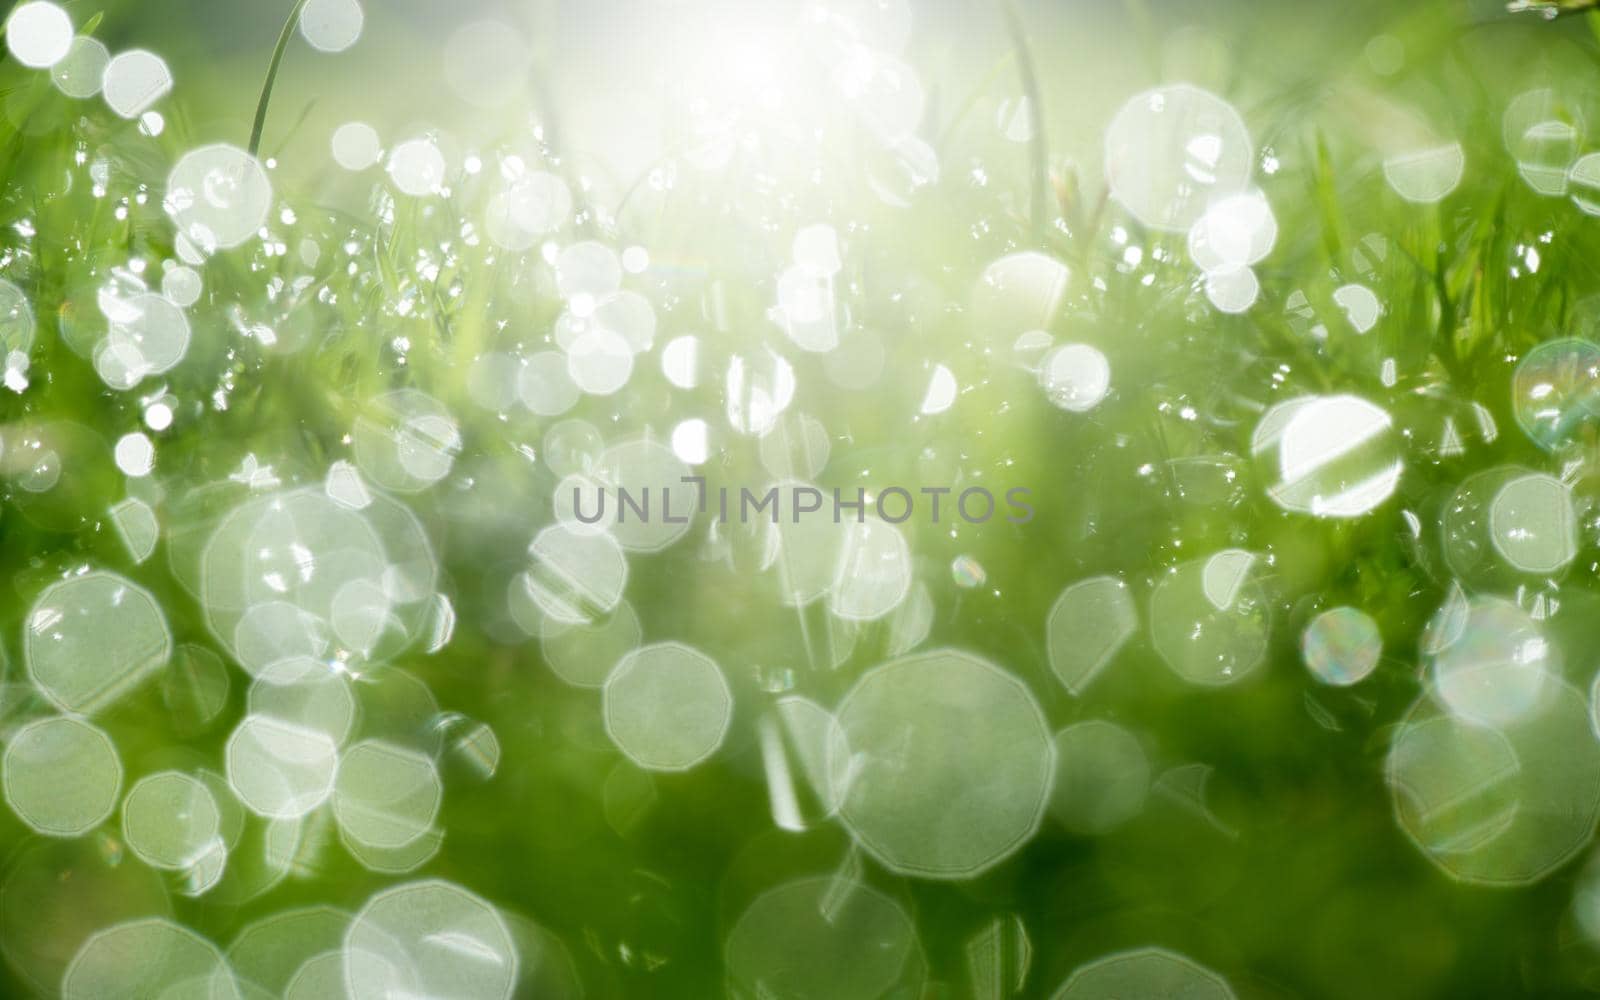 Fresh green grass with dew drops in sunshine and bokeh. Abstract blurry background. Nature background. copy space.